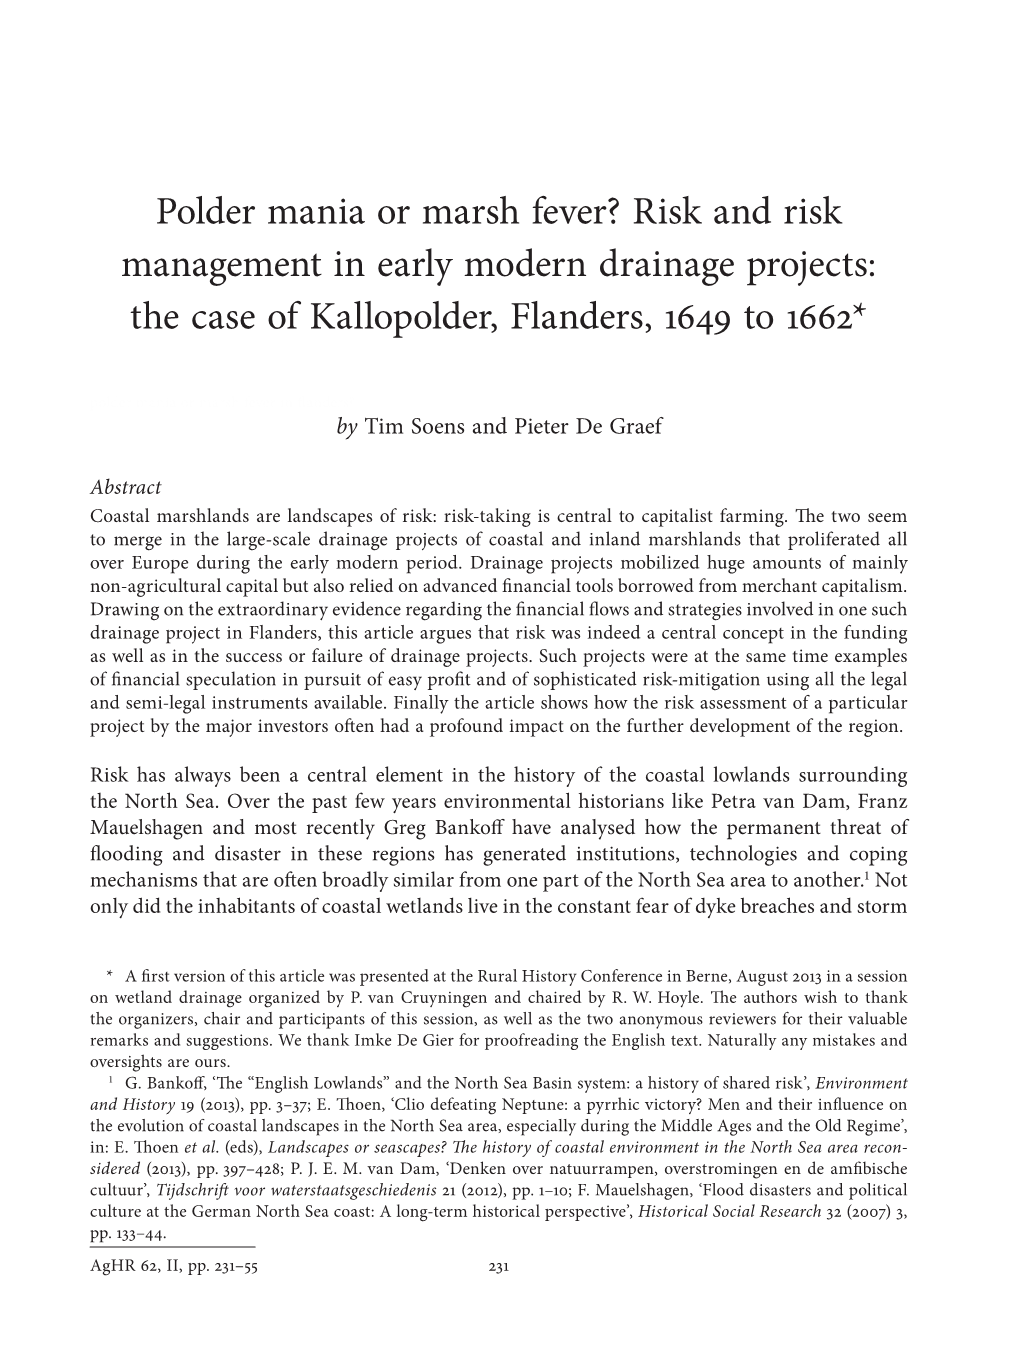 Polder Mania Or Marsh Fever? Risk and Risk Management in Early Modern Drainage Projects: the Case of Kallopolder, Flanders, 1649 to 1662*